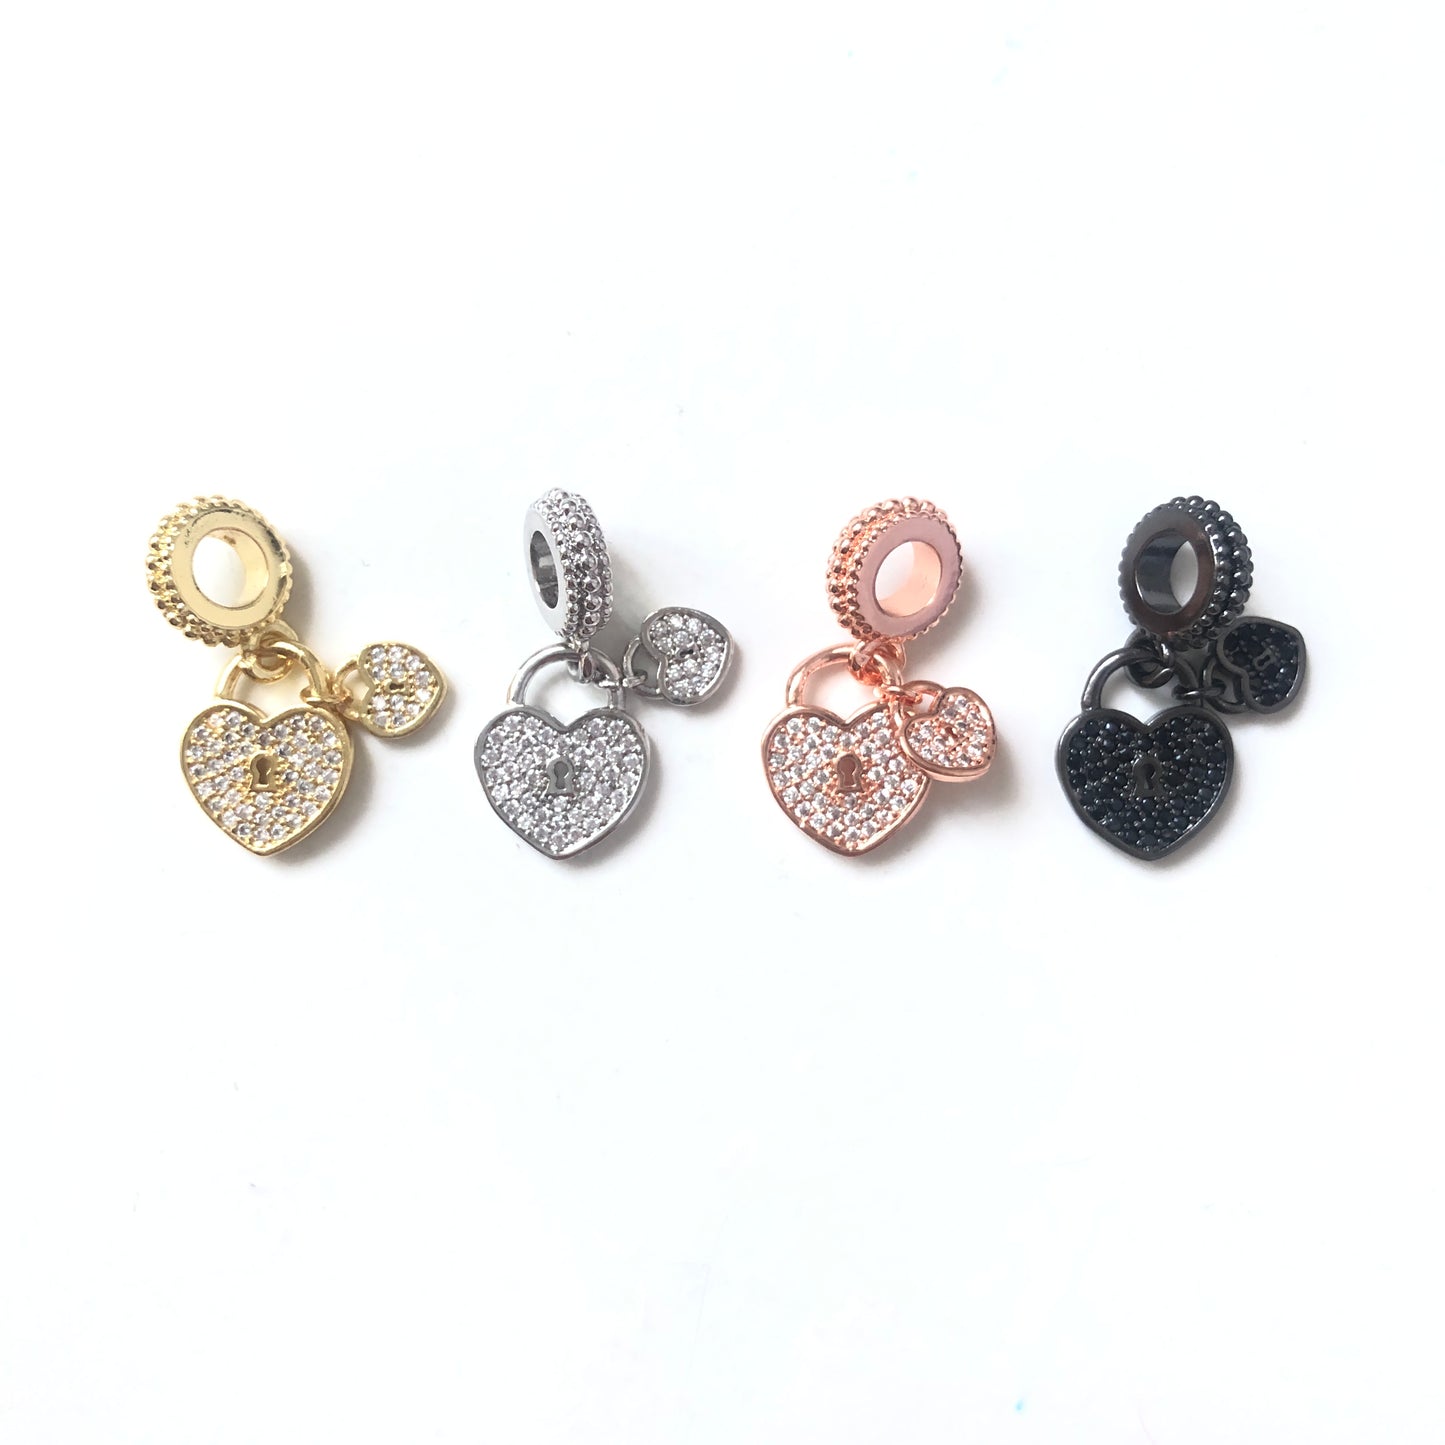 10pcs/lot 23*11mm CZ Paved Double Heart Lock Charms CZ Paved Charms Hearts Charms Beads Beyond